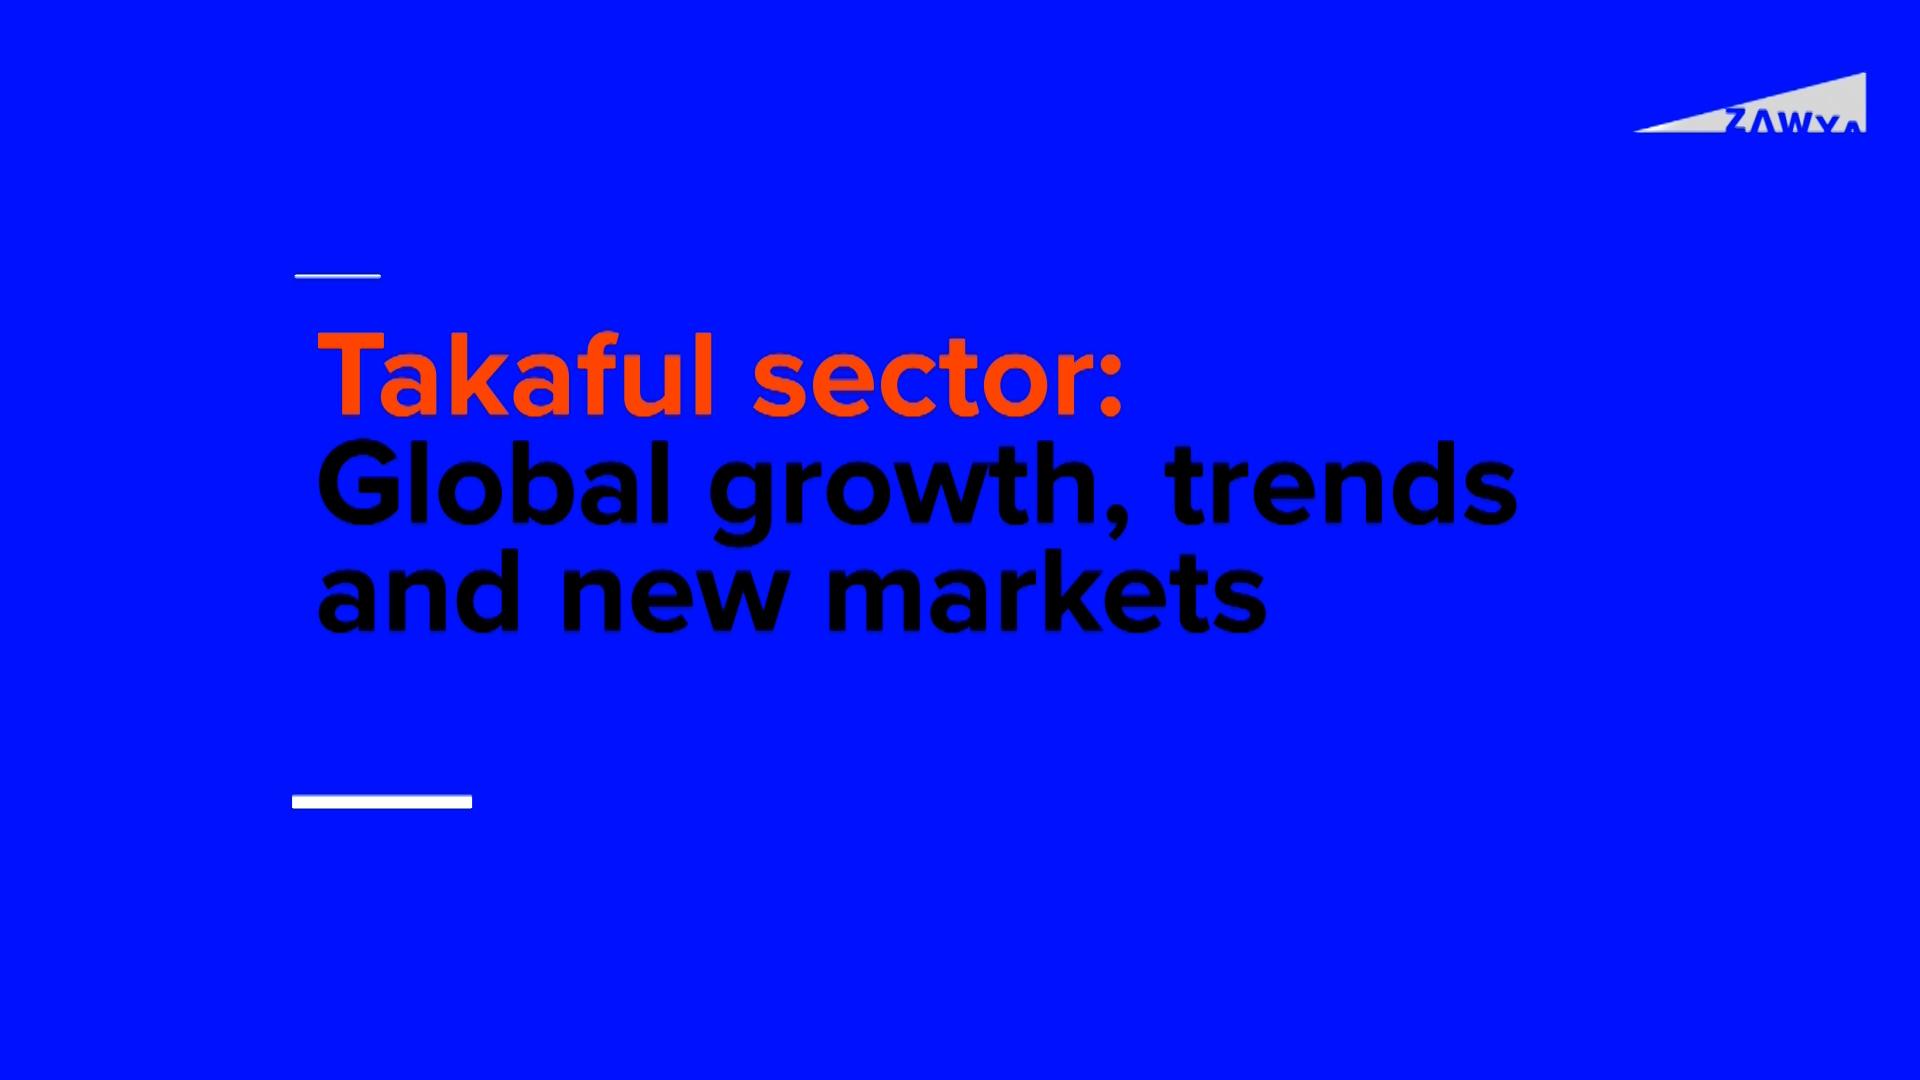 Takaful sector: Global growth, trends and new markets